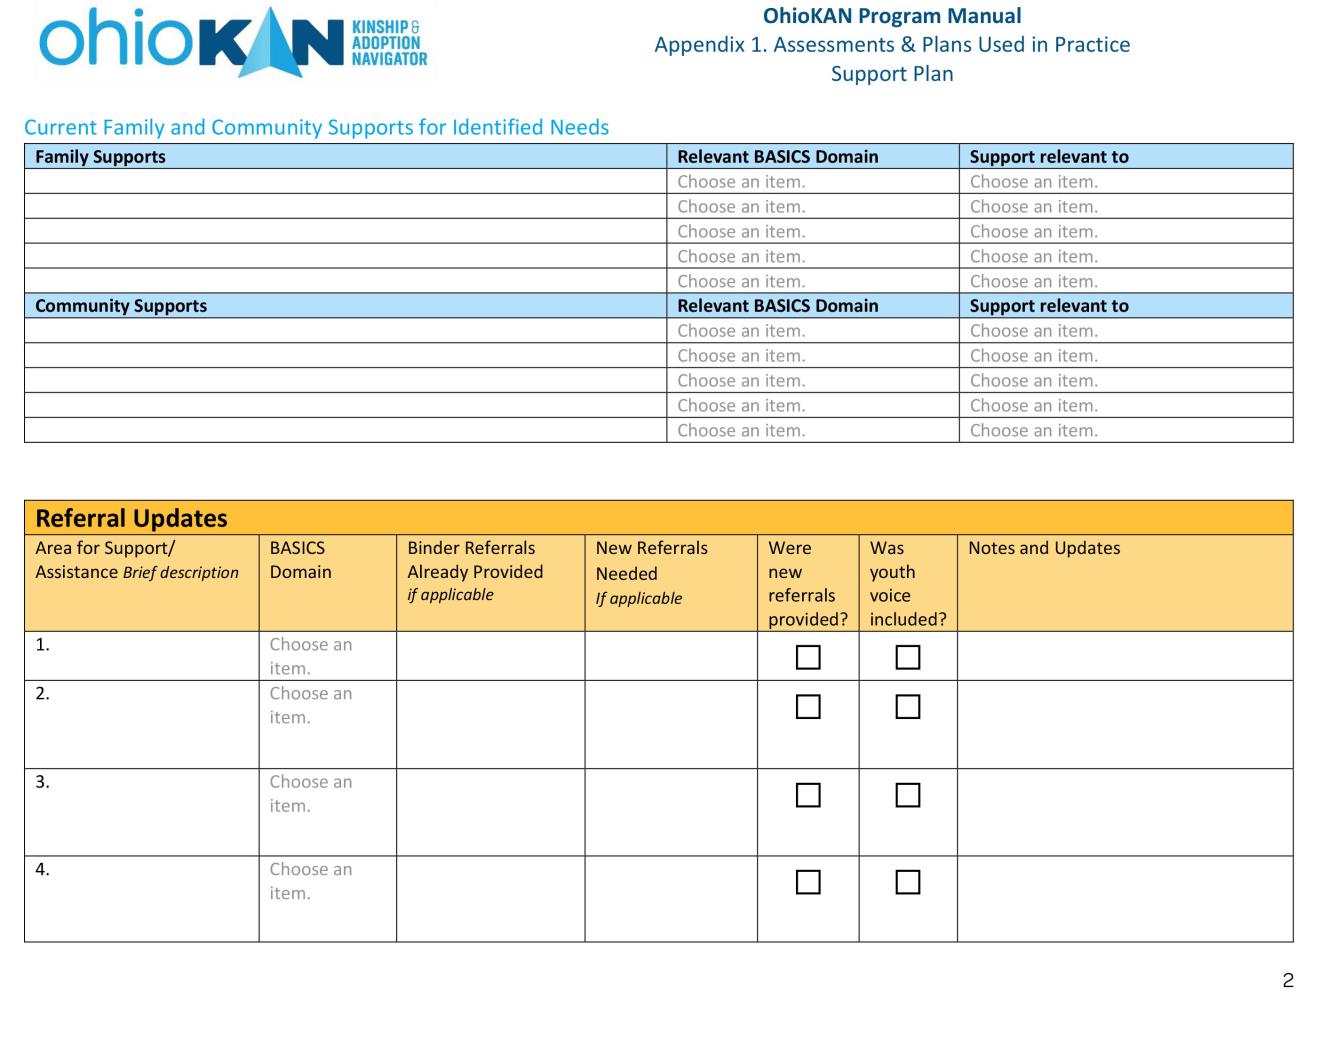 Appendix 1. Assessments & Plans Used in Practice Support Plan